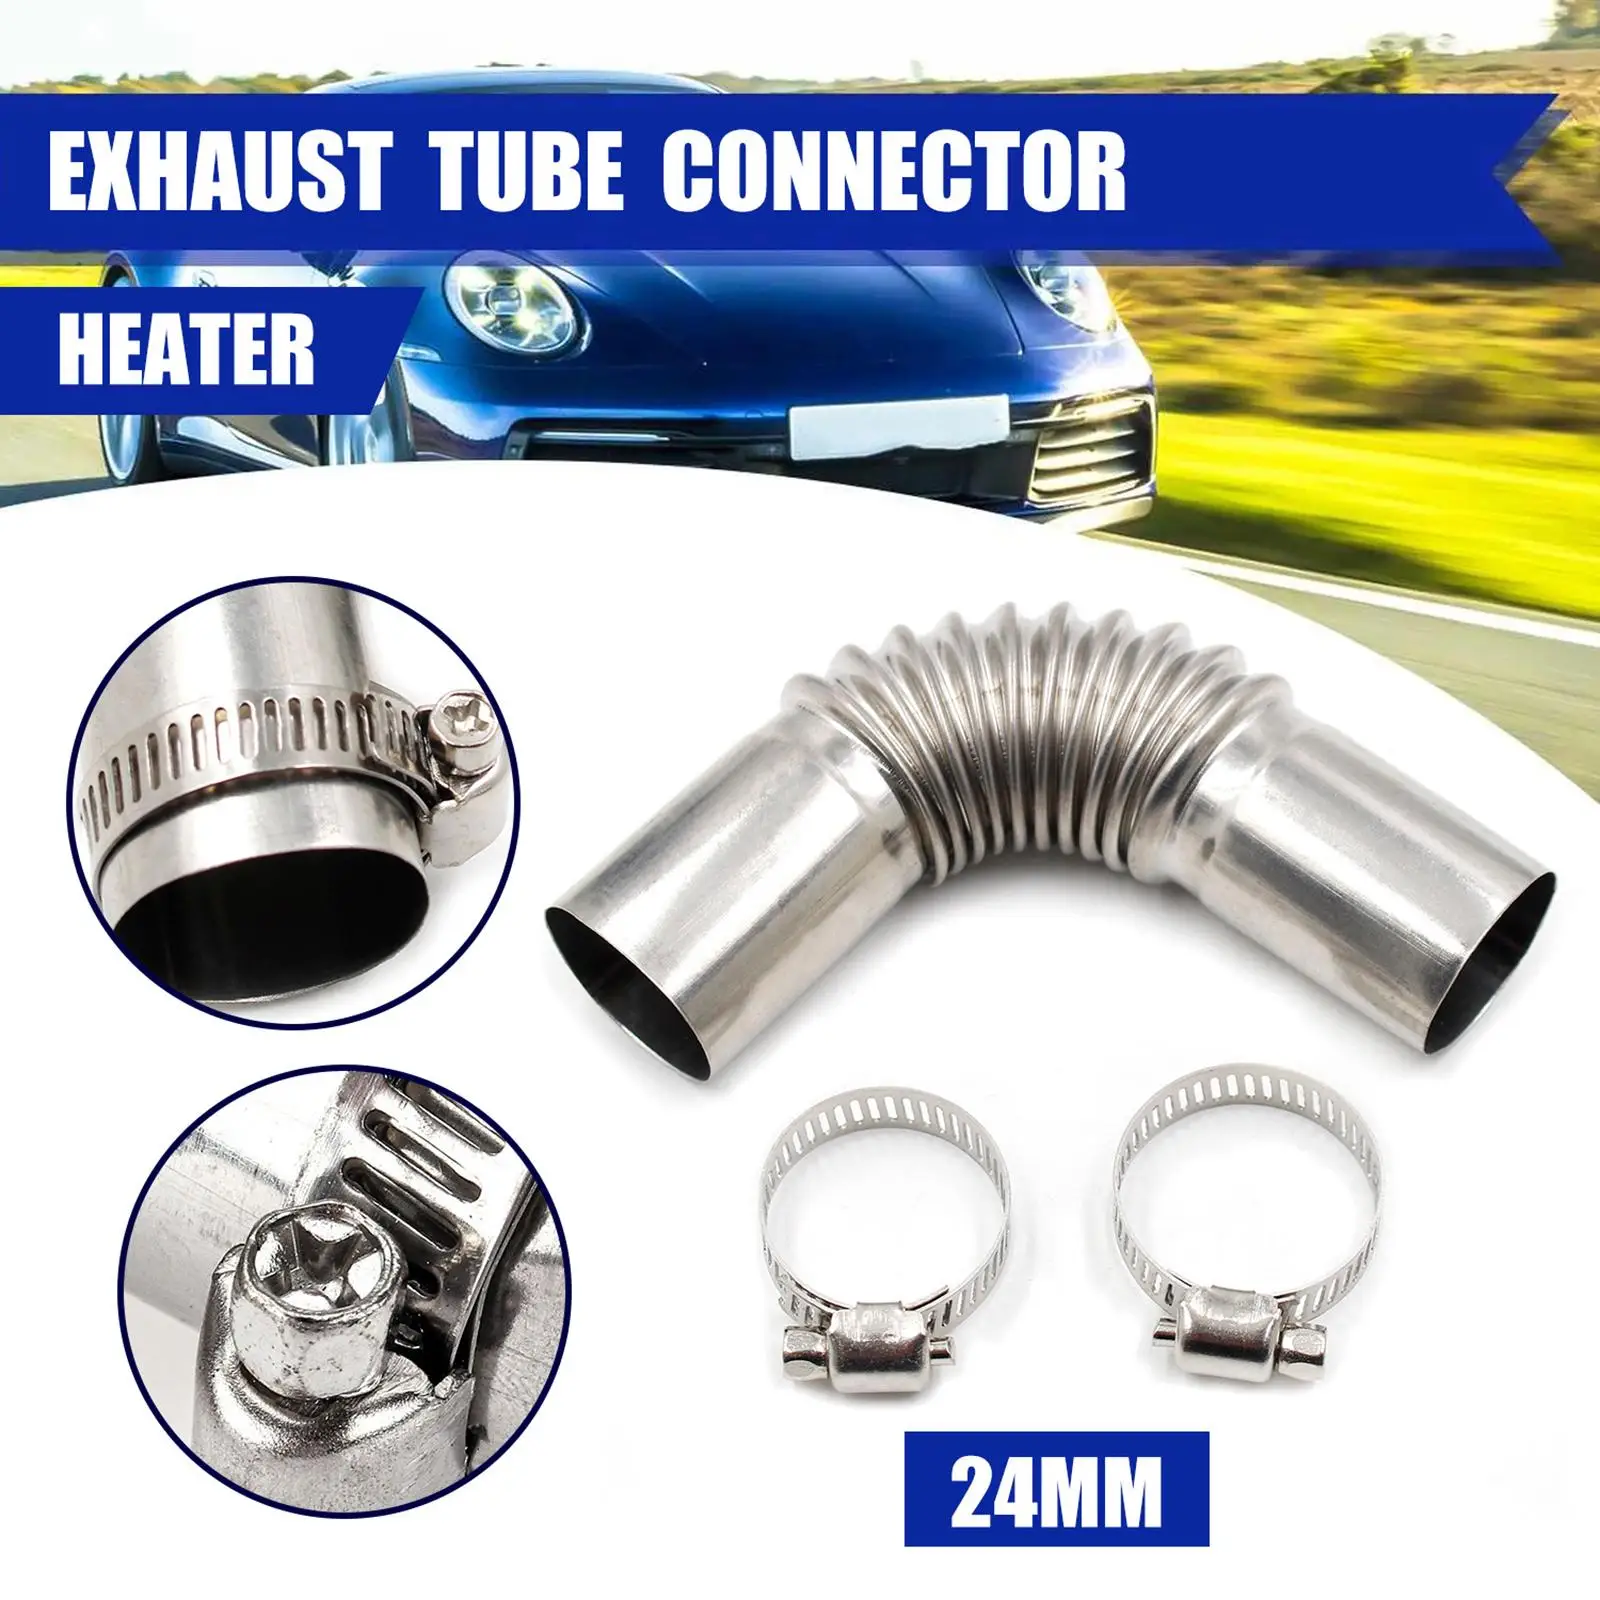 24mm Exhaust Pipe Tube Elbow Connector Windproof Cover Air Exhaust Pipes Connector for Heater Outlet Exhaust Connector